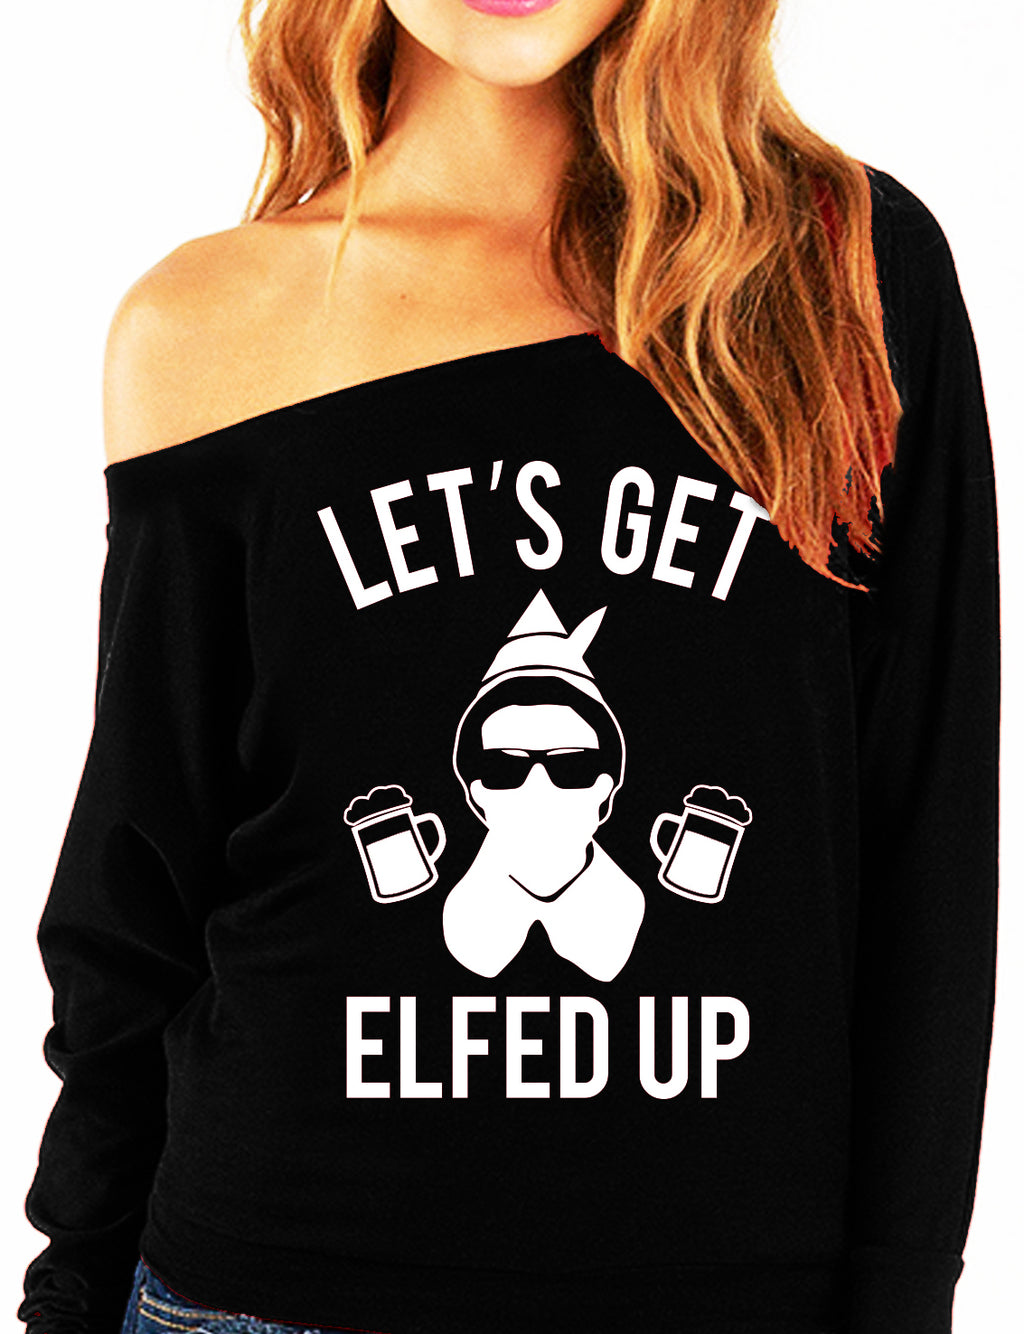 Let's Get Elfed Up Christmas Sweatshirt Slouchy Mugs Version - Pick Color